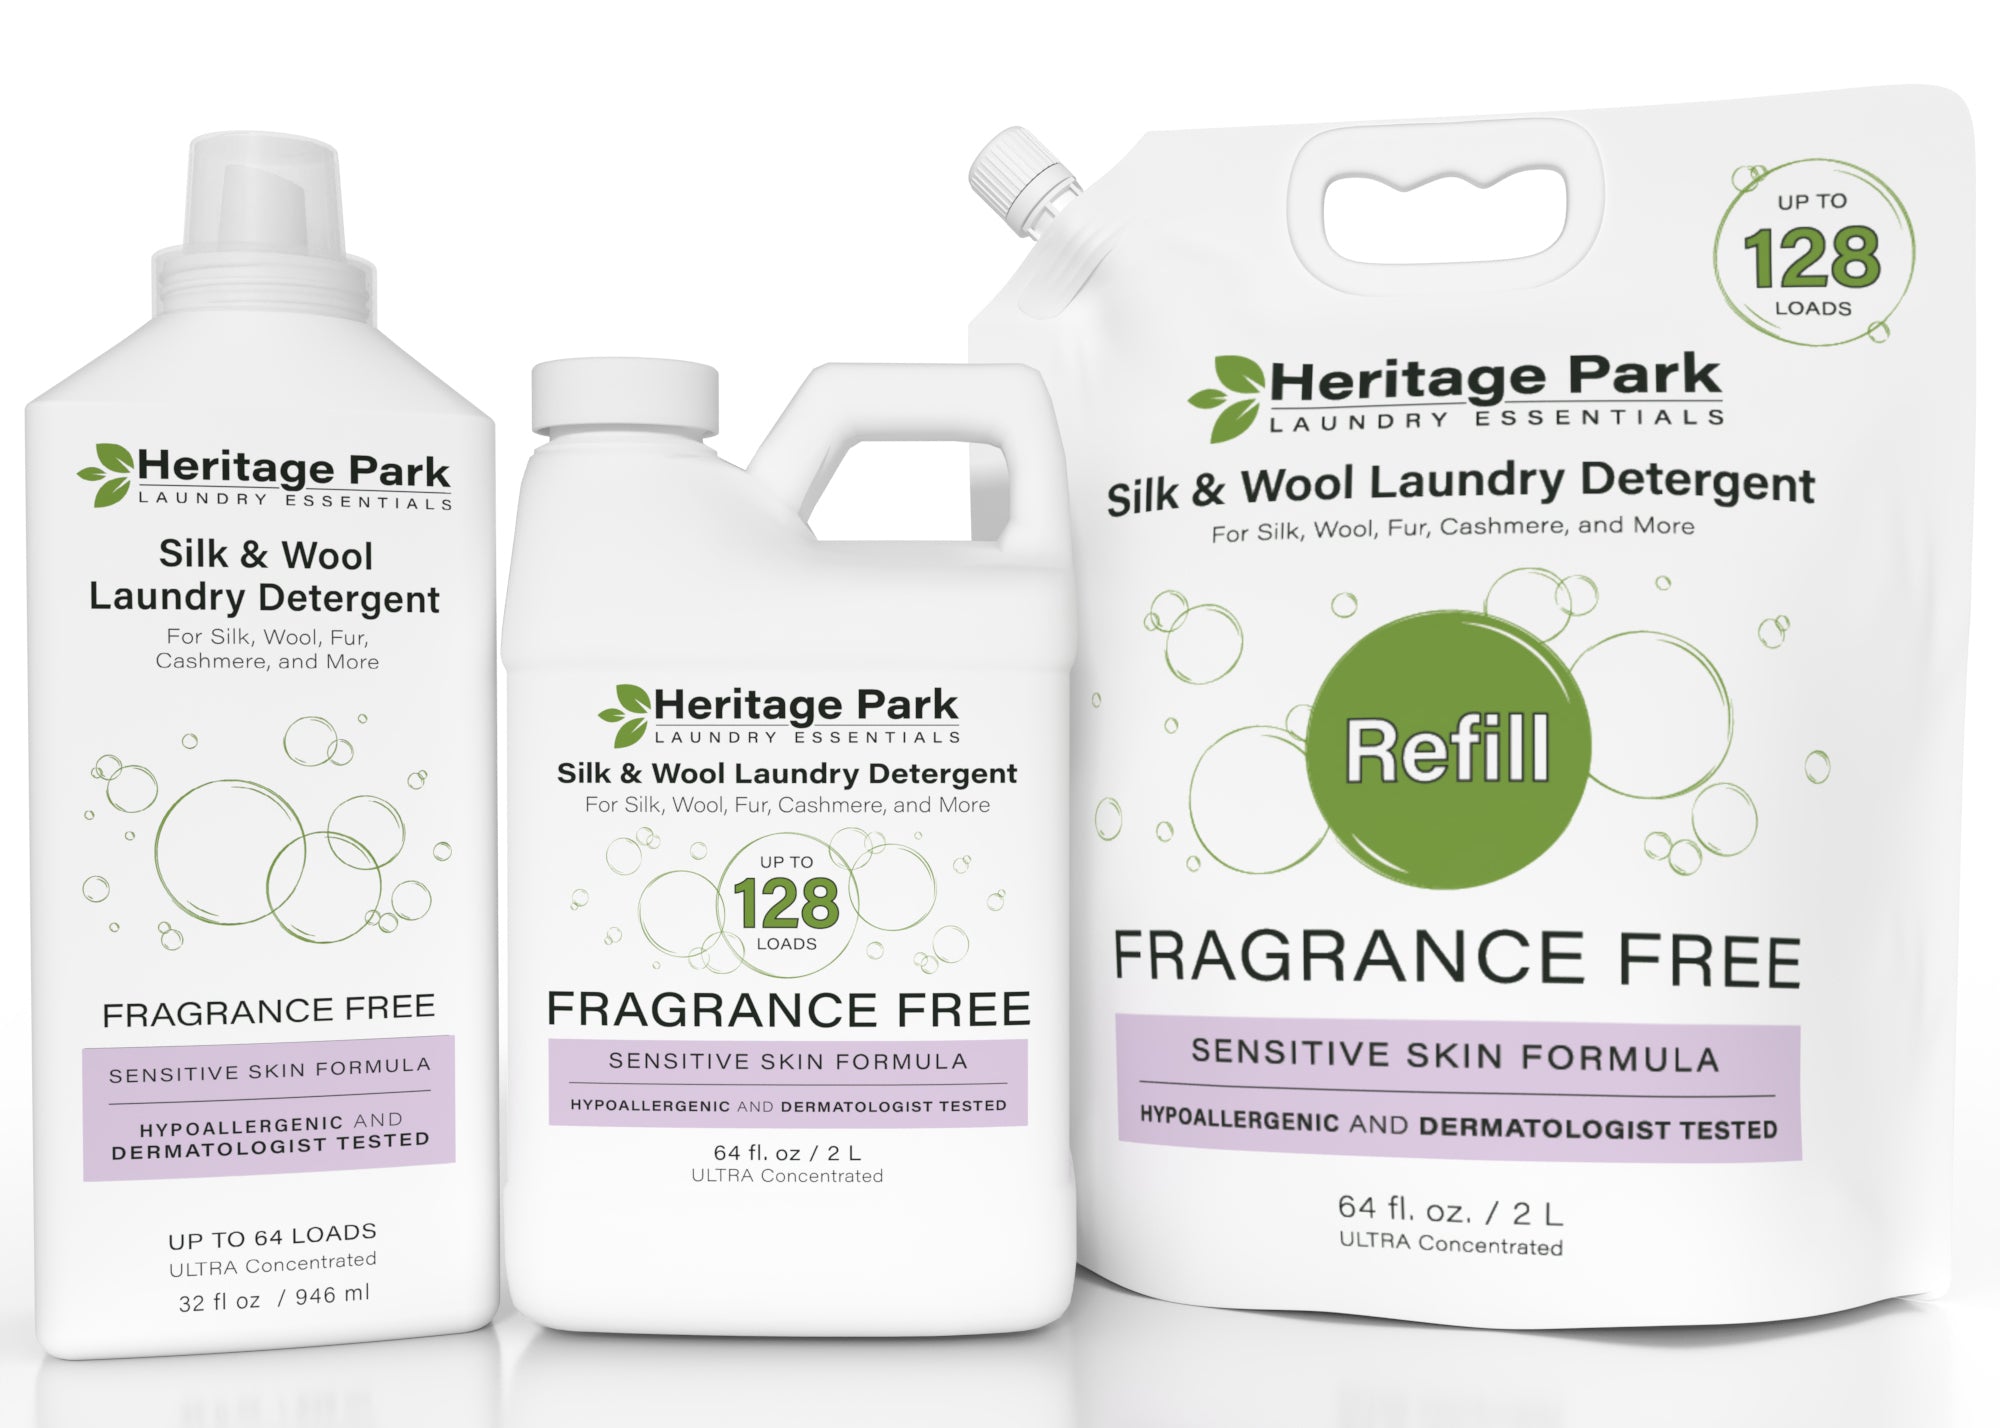 Heritage Park Silk & Wool Fragrance Free Hypoallergenic Laundry Detergents - 32oz, 64oz bottle, and 64oz Refill